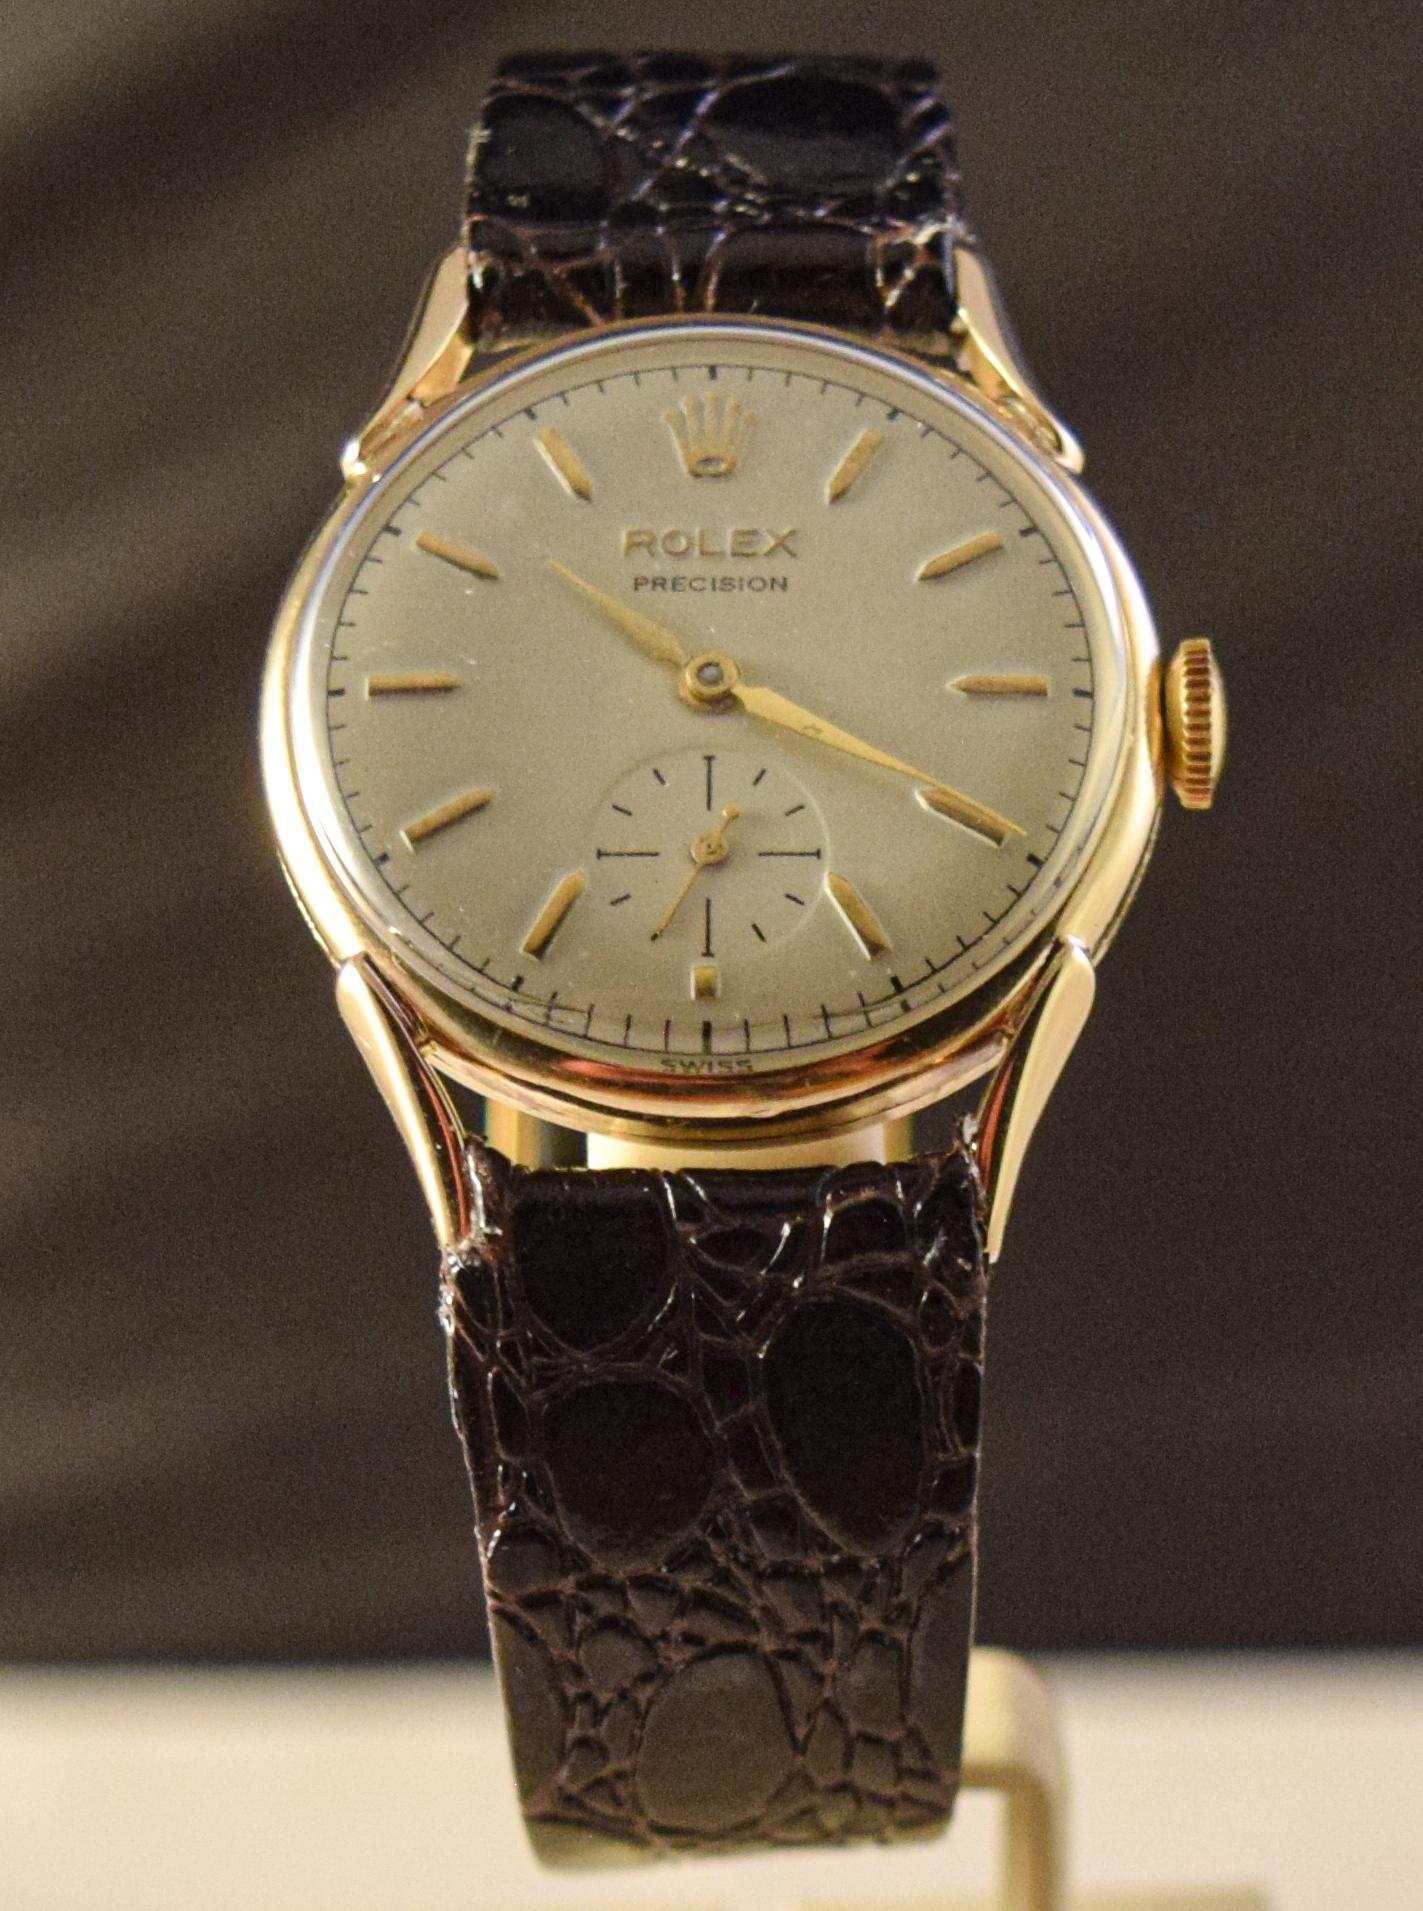 Rolex extremely rare solid gold watch with unusual lugs 5